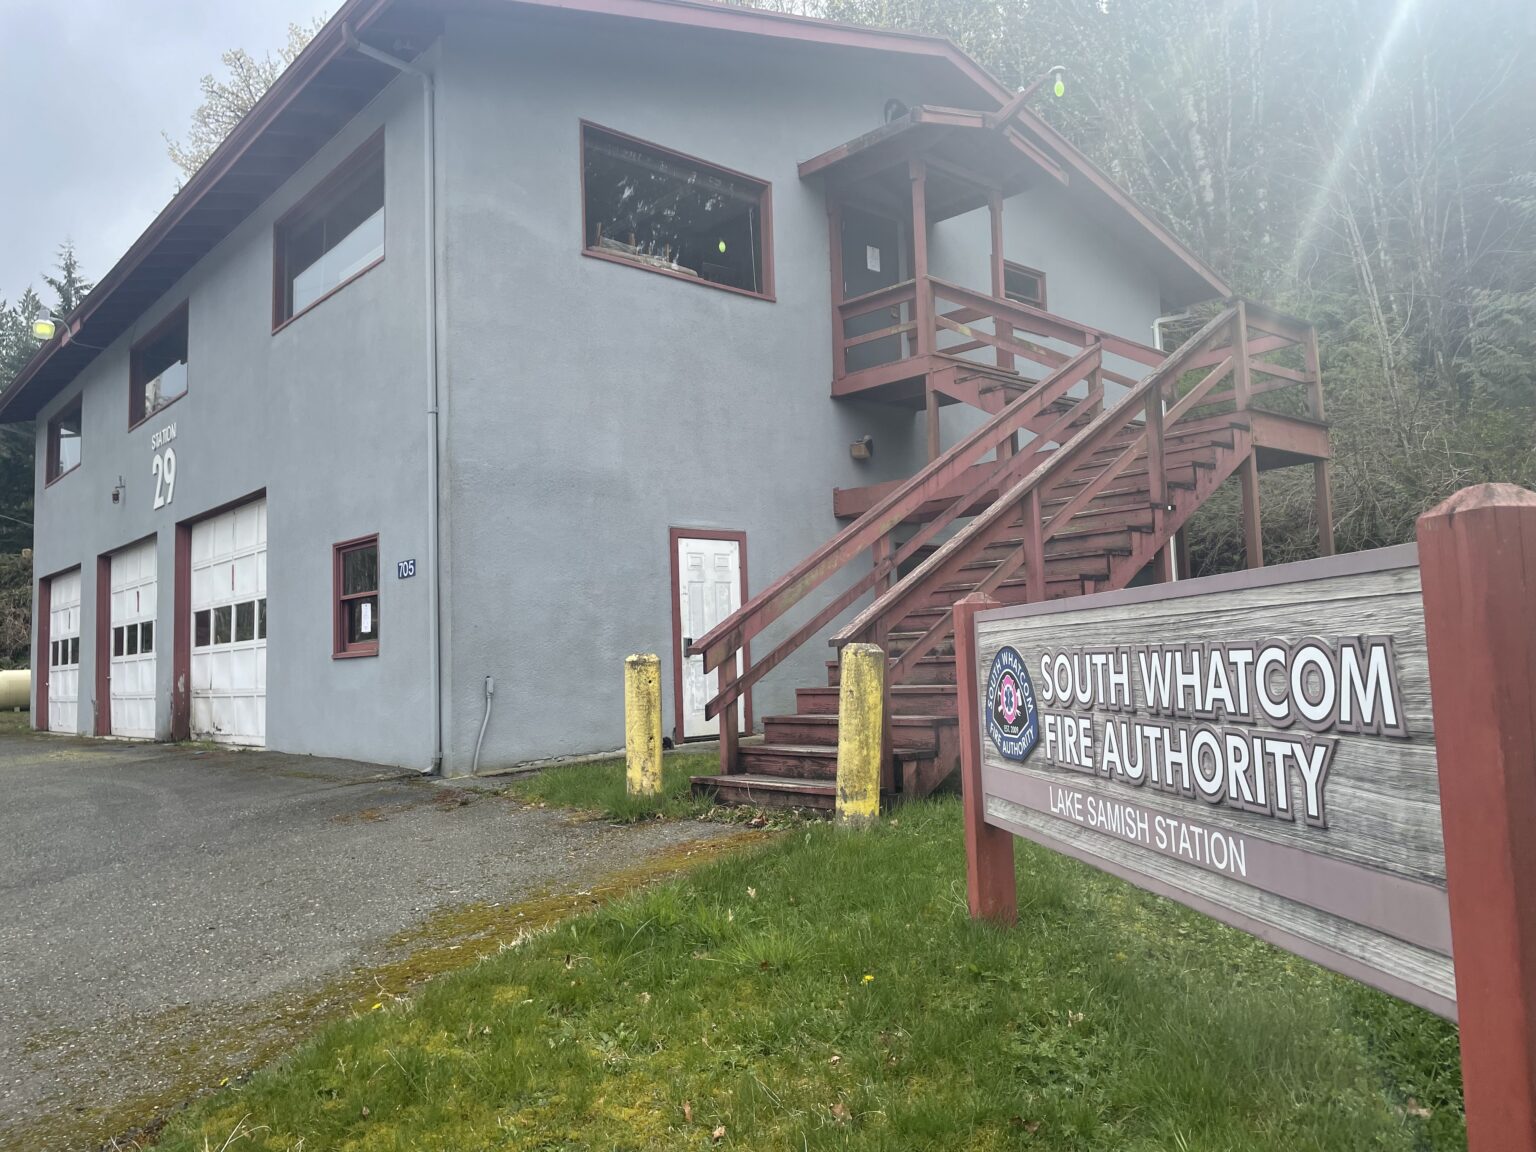 The South Whatcom Fire Authority is considering surplusing the Community/Fire Hall on West Lake Samish Drive